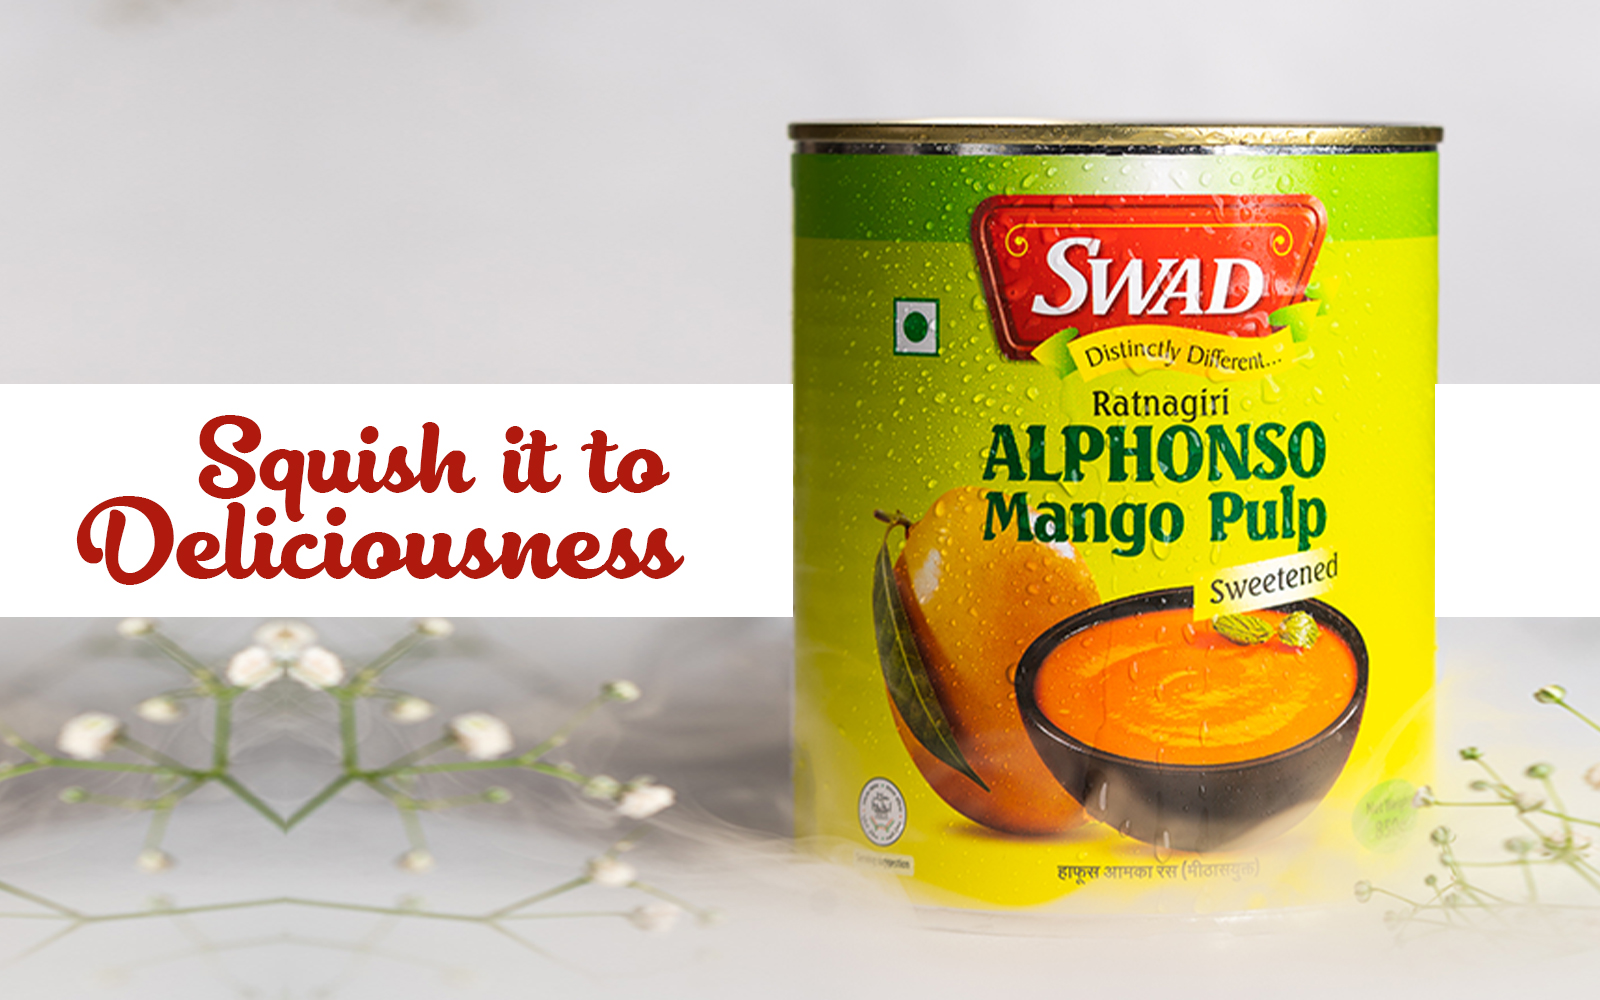 Thing You Must know before Picking up a tin of Alphonso Mango Pulp